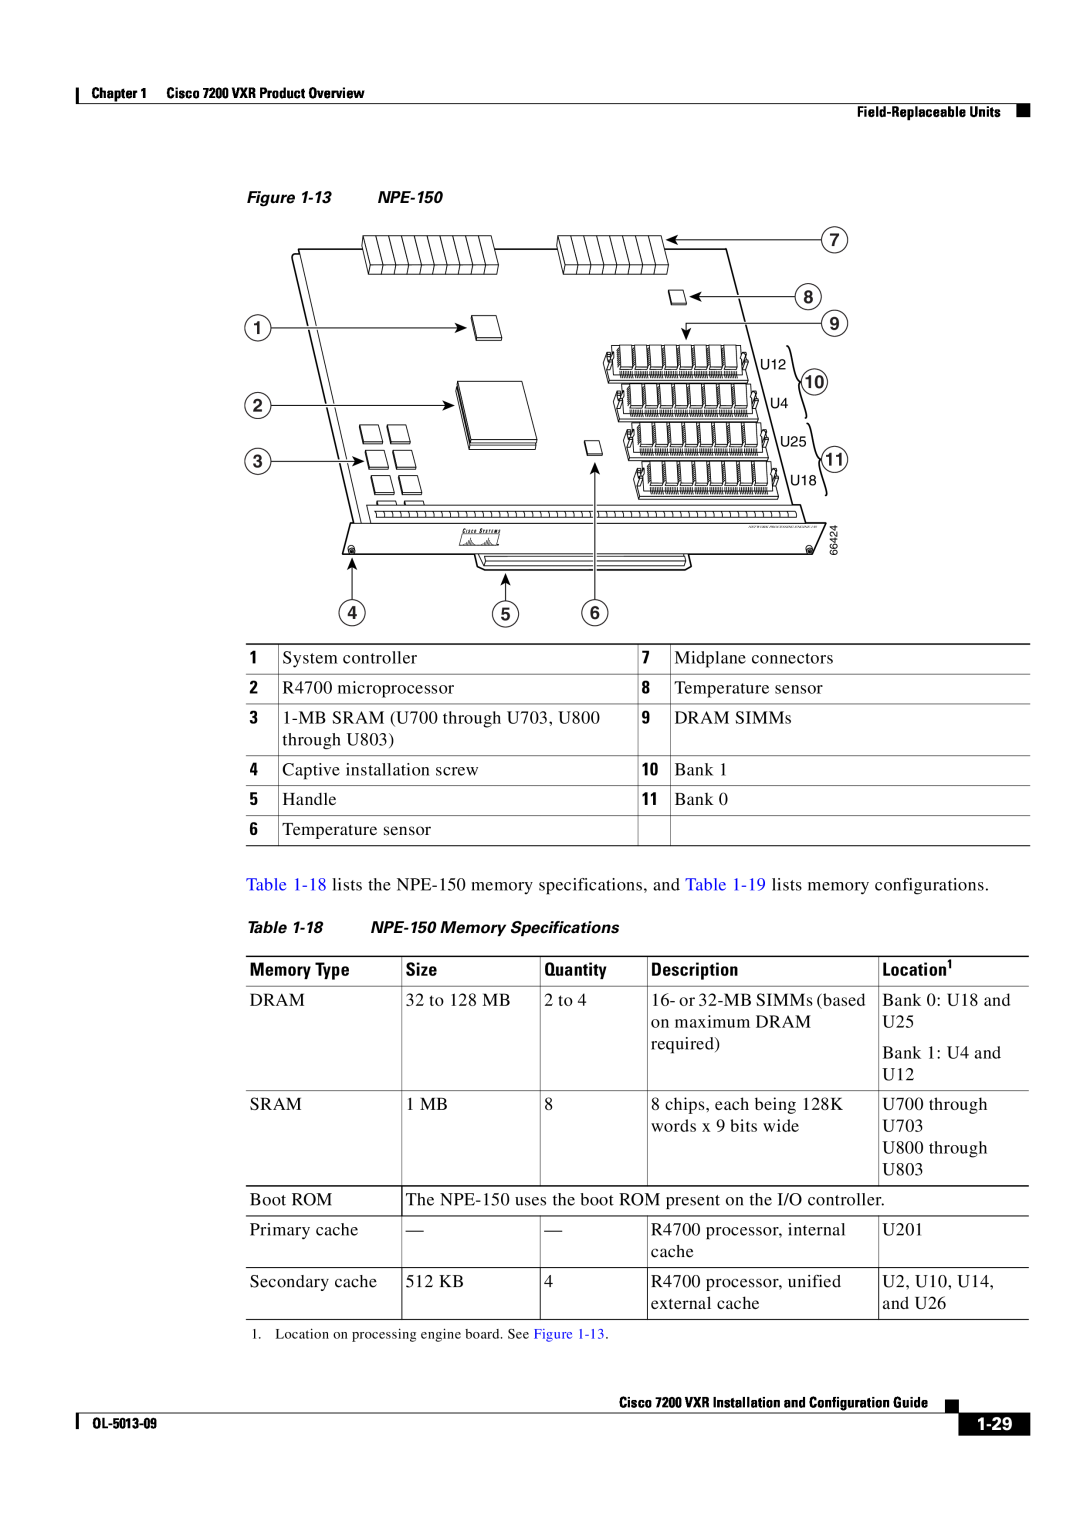 Cisco Systems 7200 VXR manual 1-29, NPE-150 Memory Specifications 